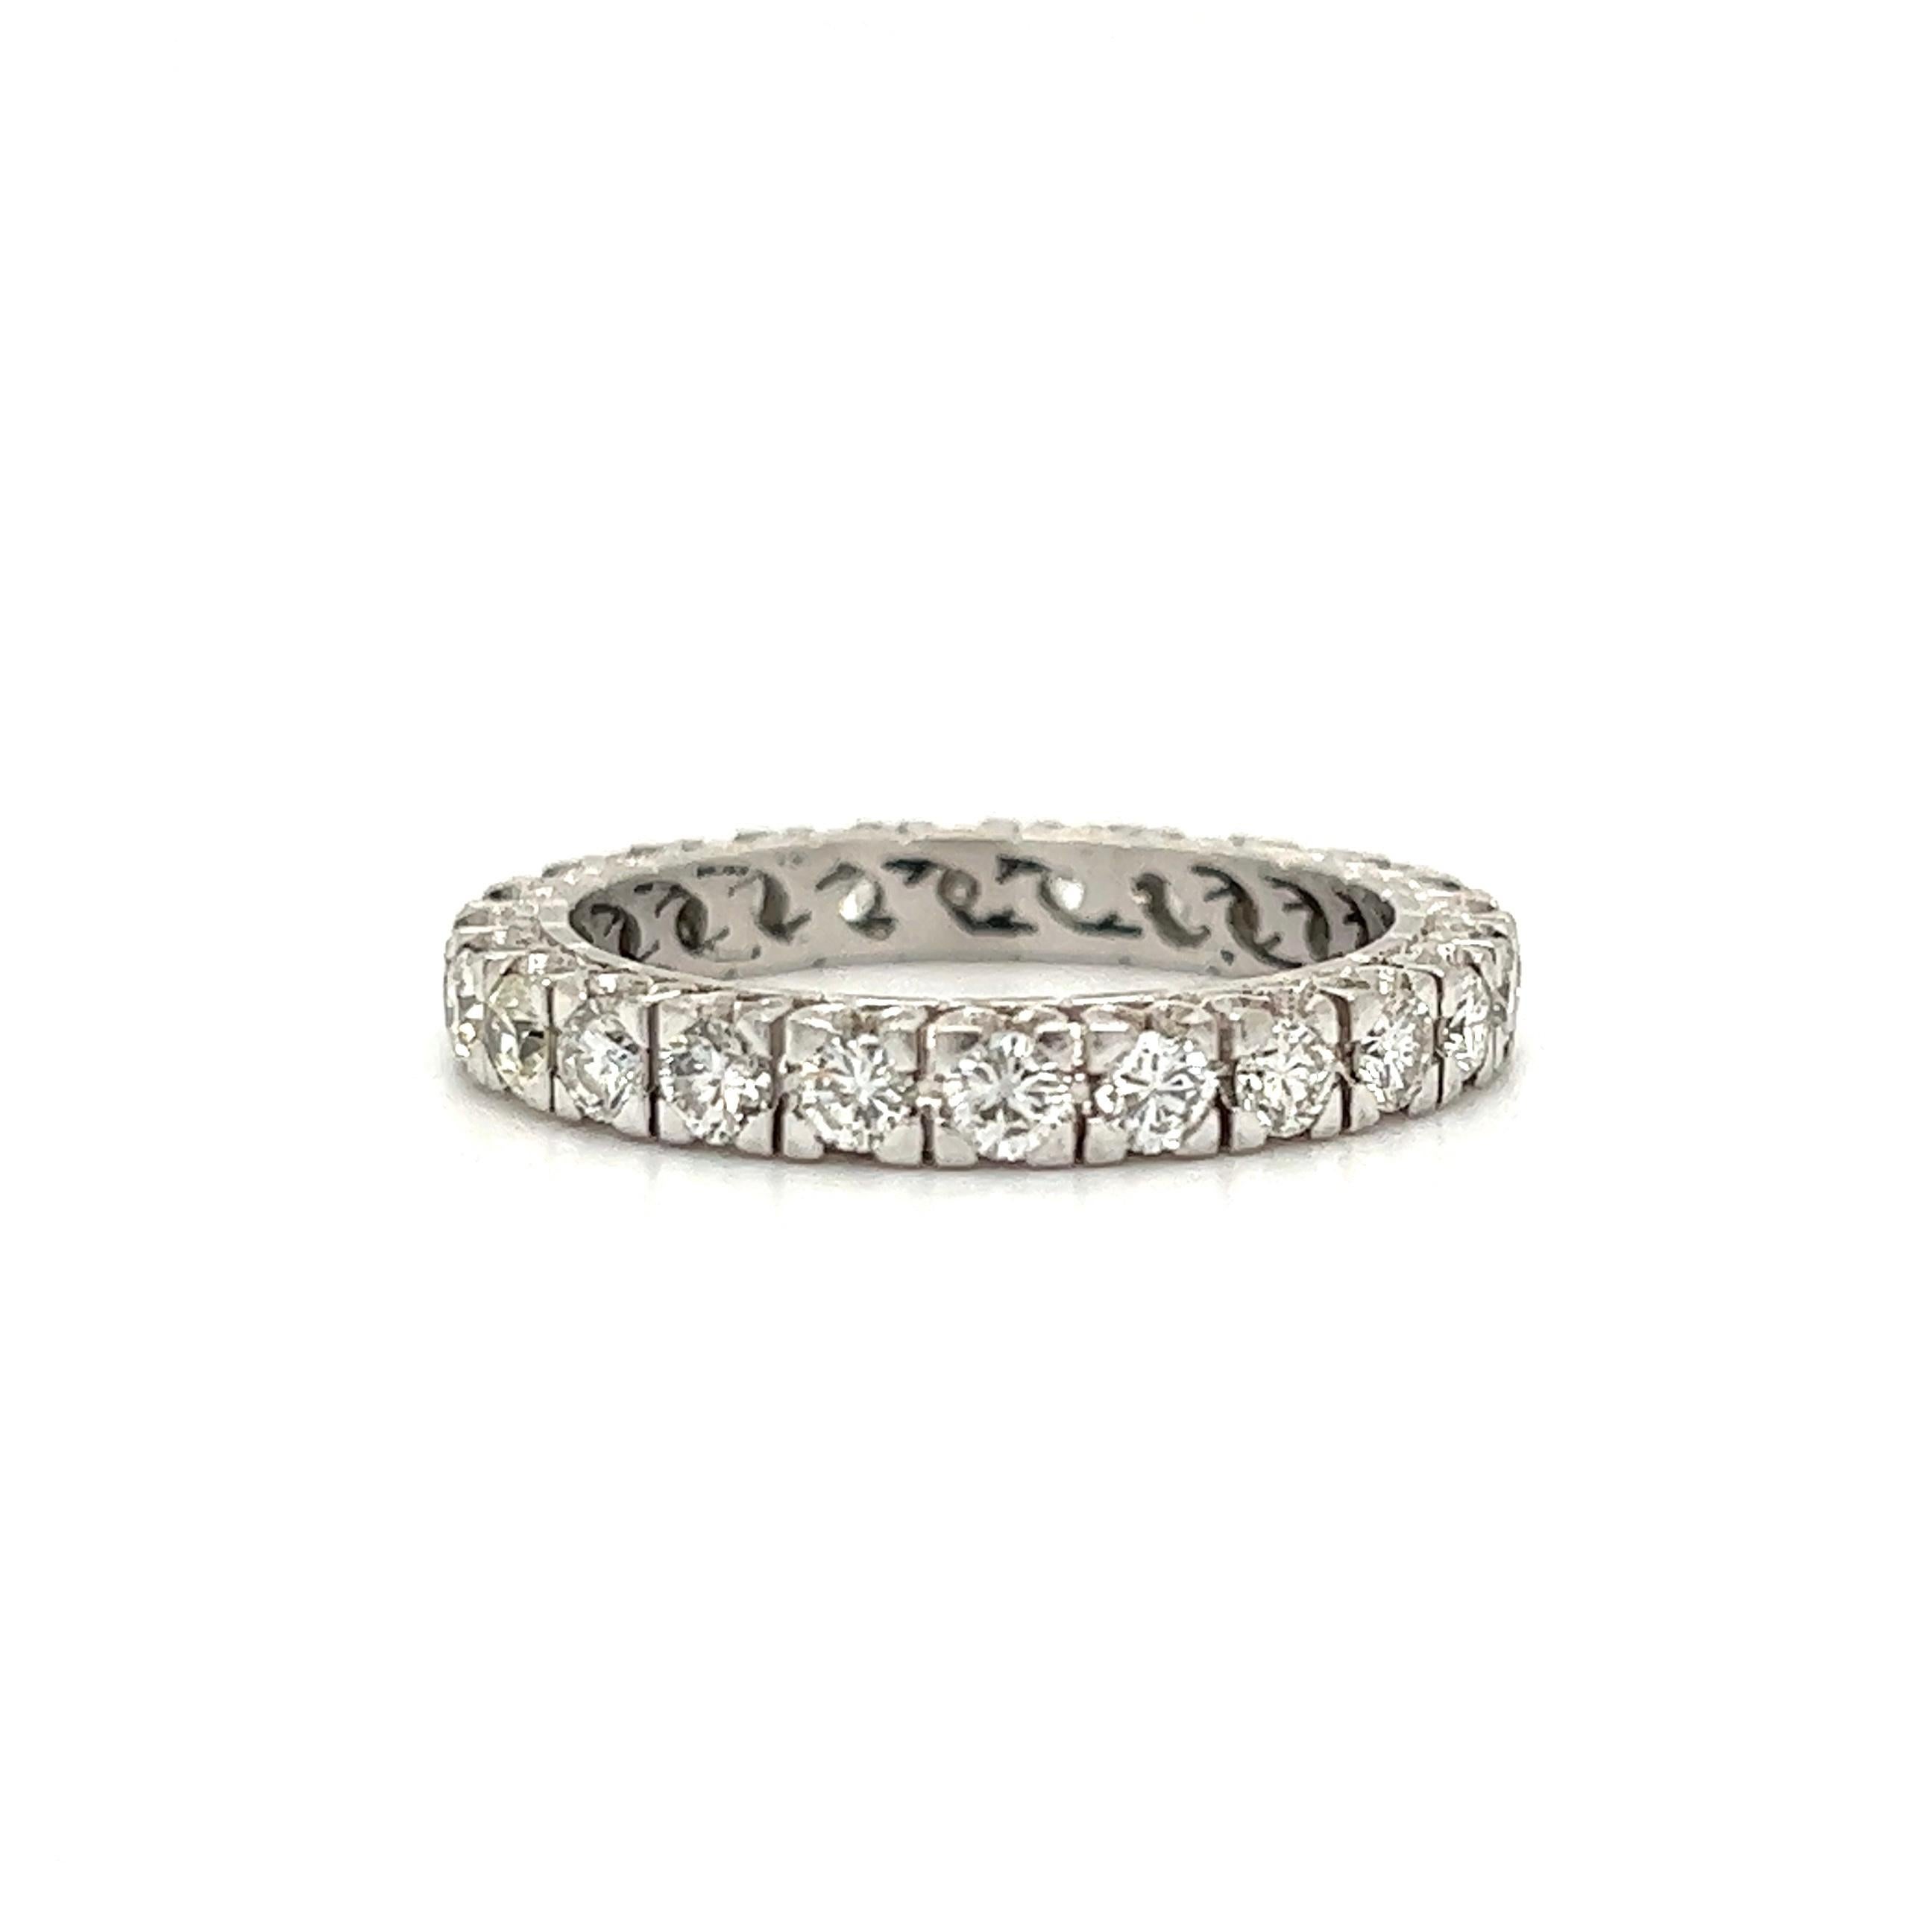 Simply Beautiful! Finely detailed Diamond White Gold Eternity Band Ring. Securely Hand set with 24 Round Brilliant-Cut Diamonds, weighing approx. 2.00tcw. Hand crafted 18K White Gold mounting. Ideal worn alone or as an alternative Engagement ring or